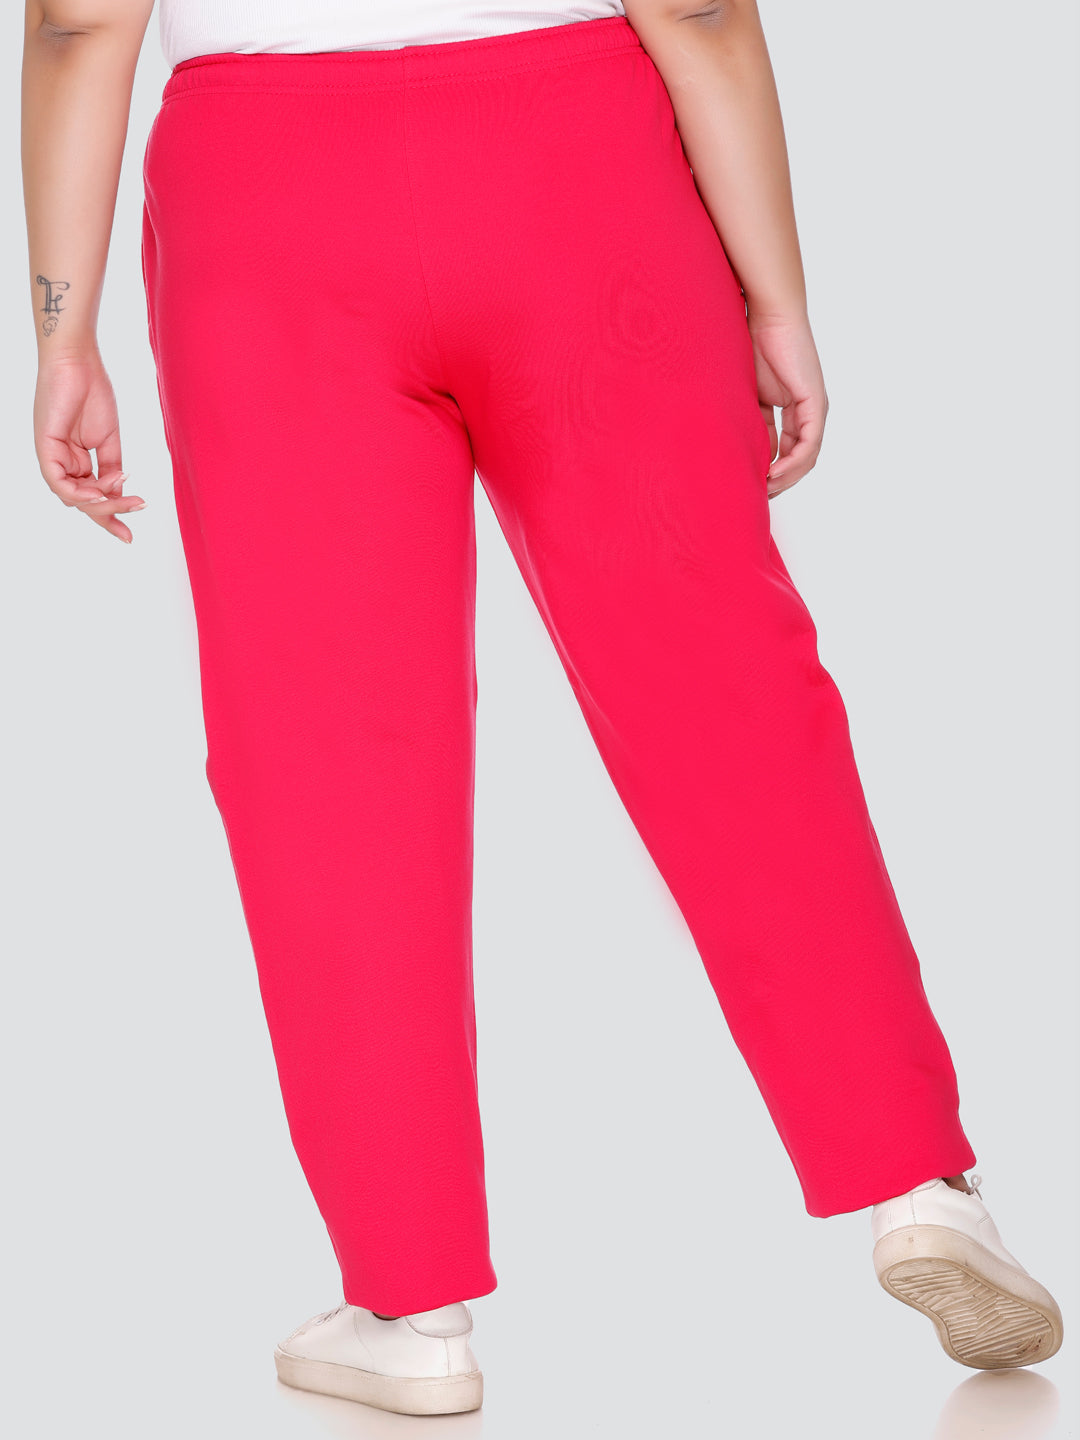 Stylish Pink Cotton Plus Size Winter Fleece Track pants For Women Online In India